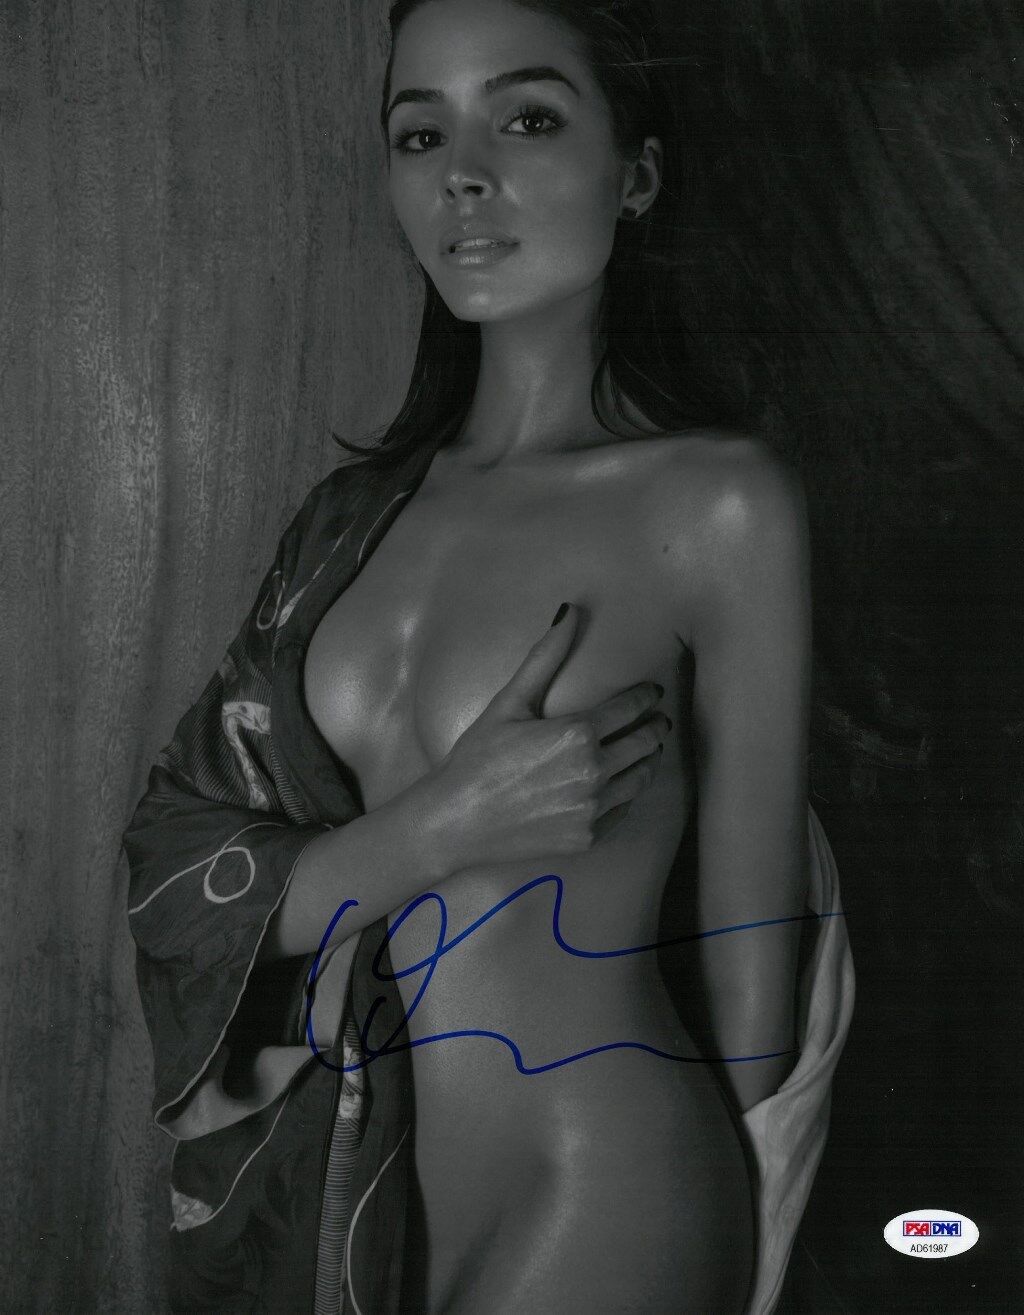 Olivia Culpo Signed Sexy Authentic Autographed 11x14 Photo Poster painting PSA/DNA #AD61987